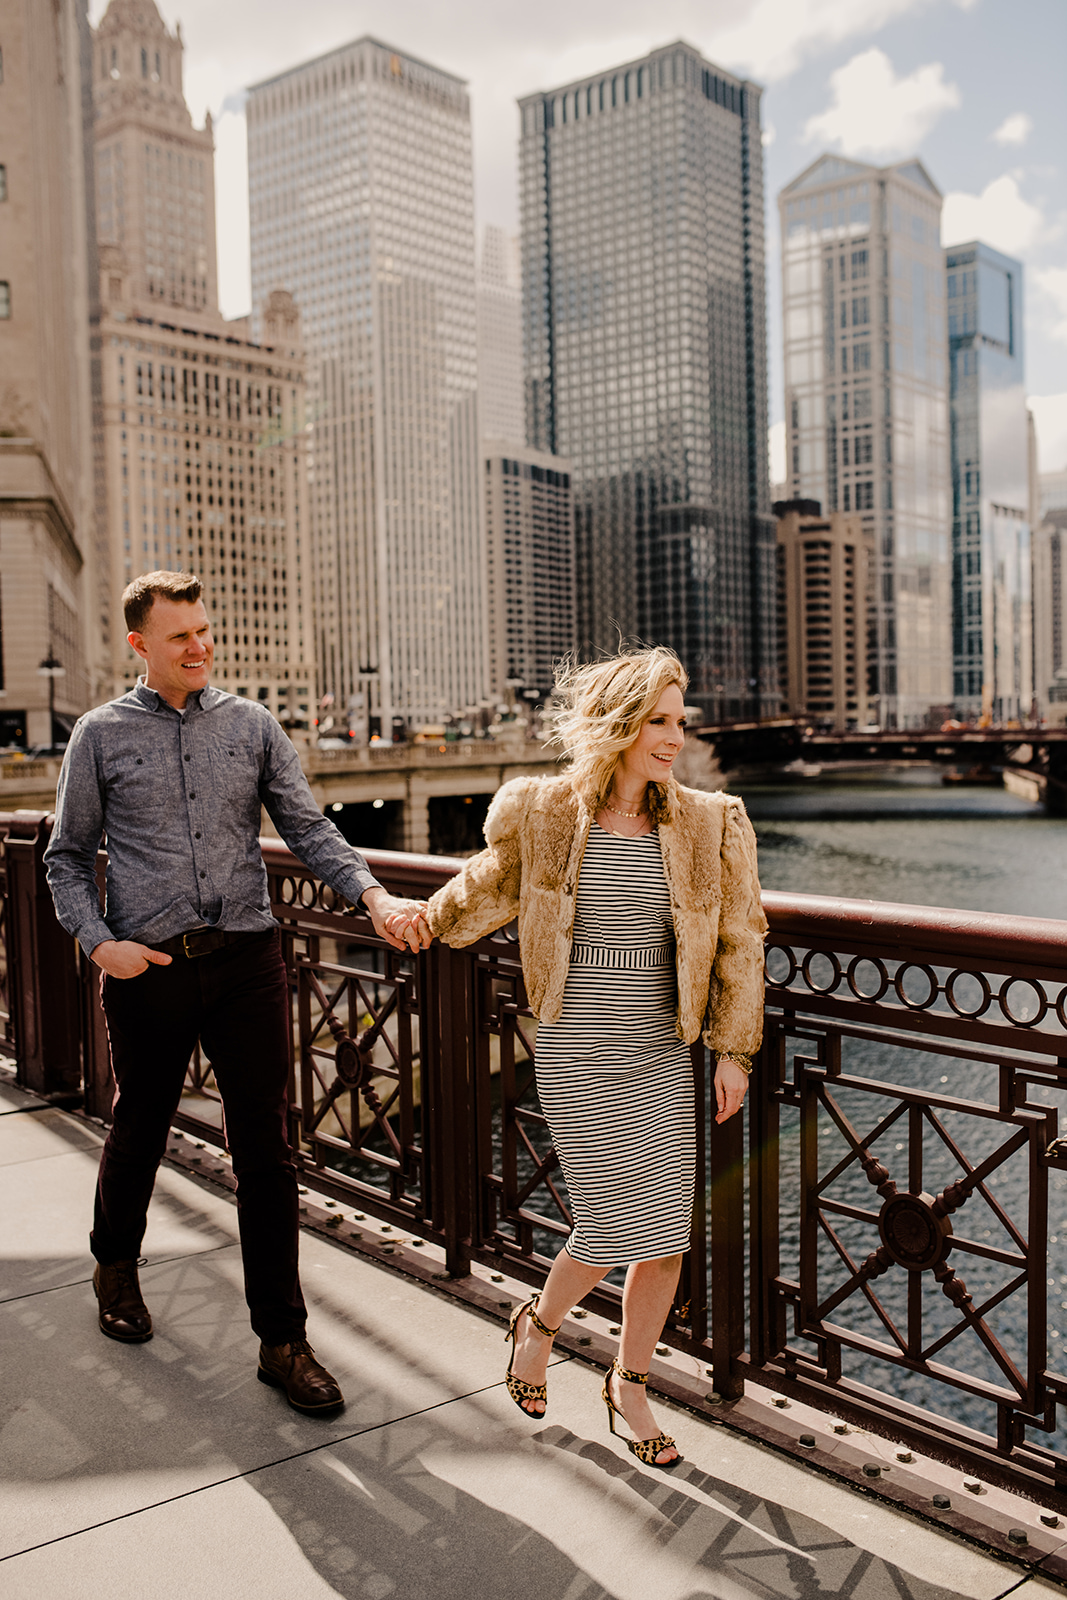 Magnificent Mile love story captured by Stills by Hernan
